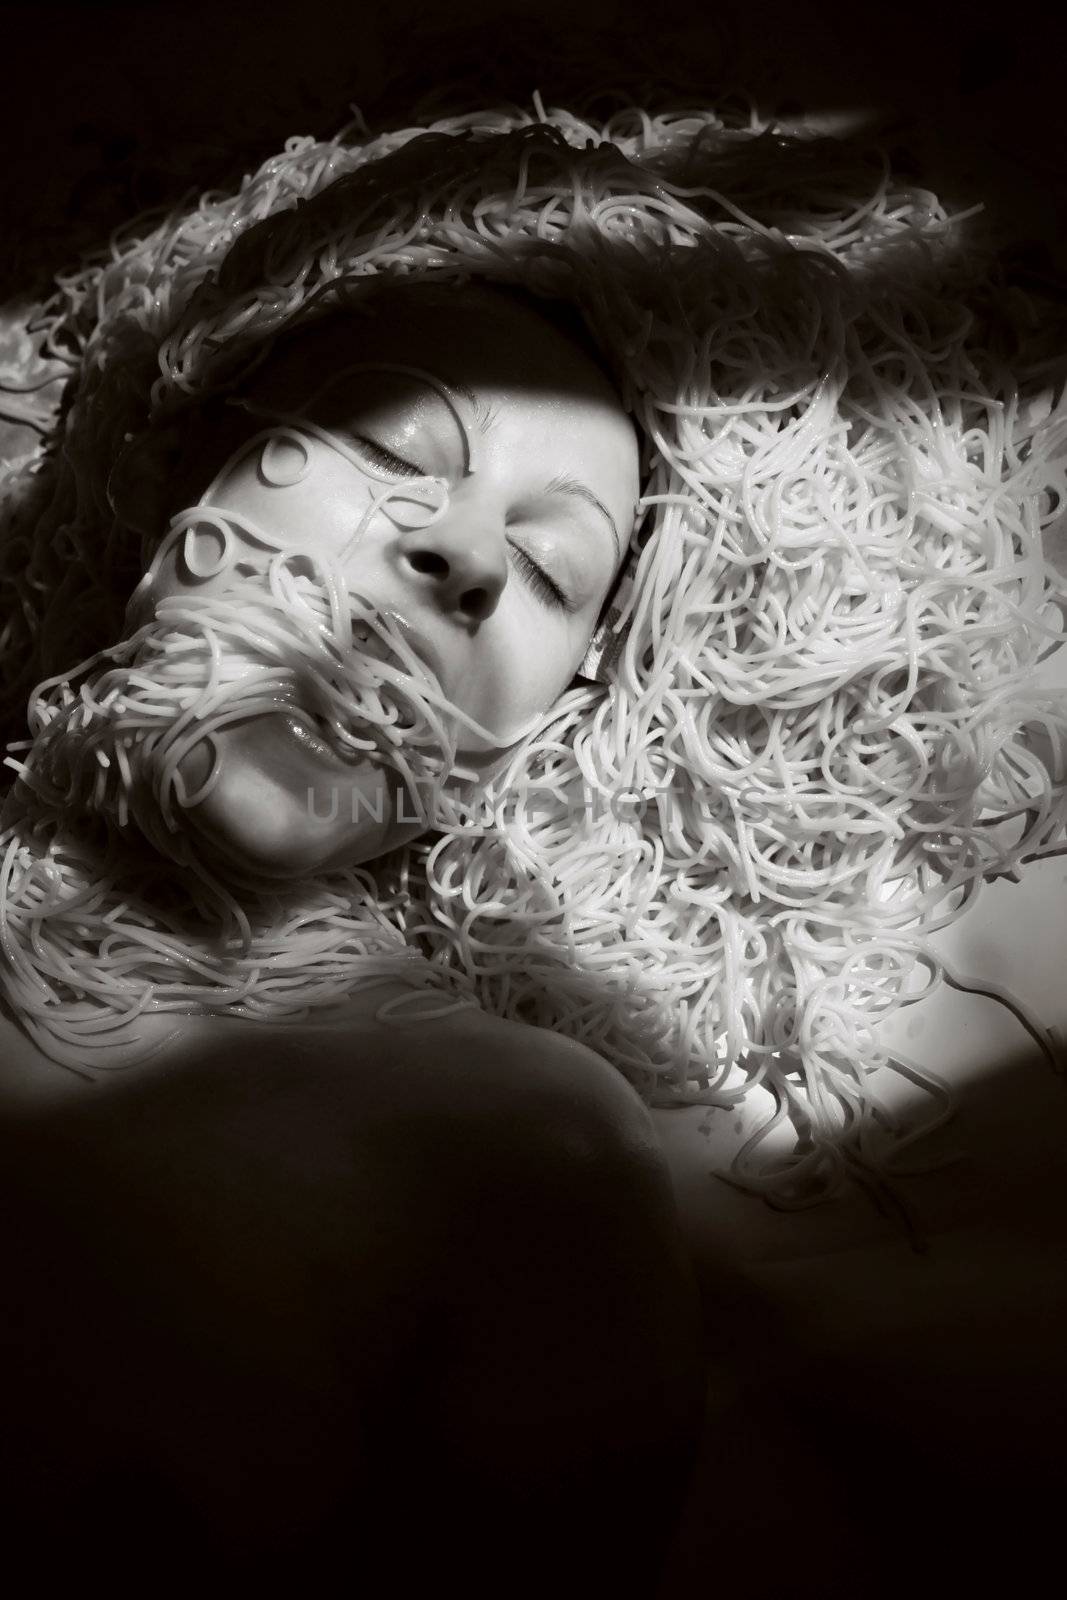 lack and white photo of woman laying on ground with spaghetti all over around the head.